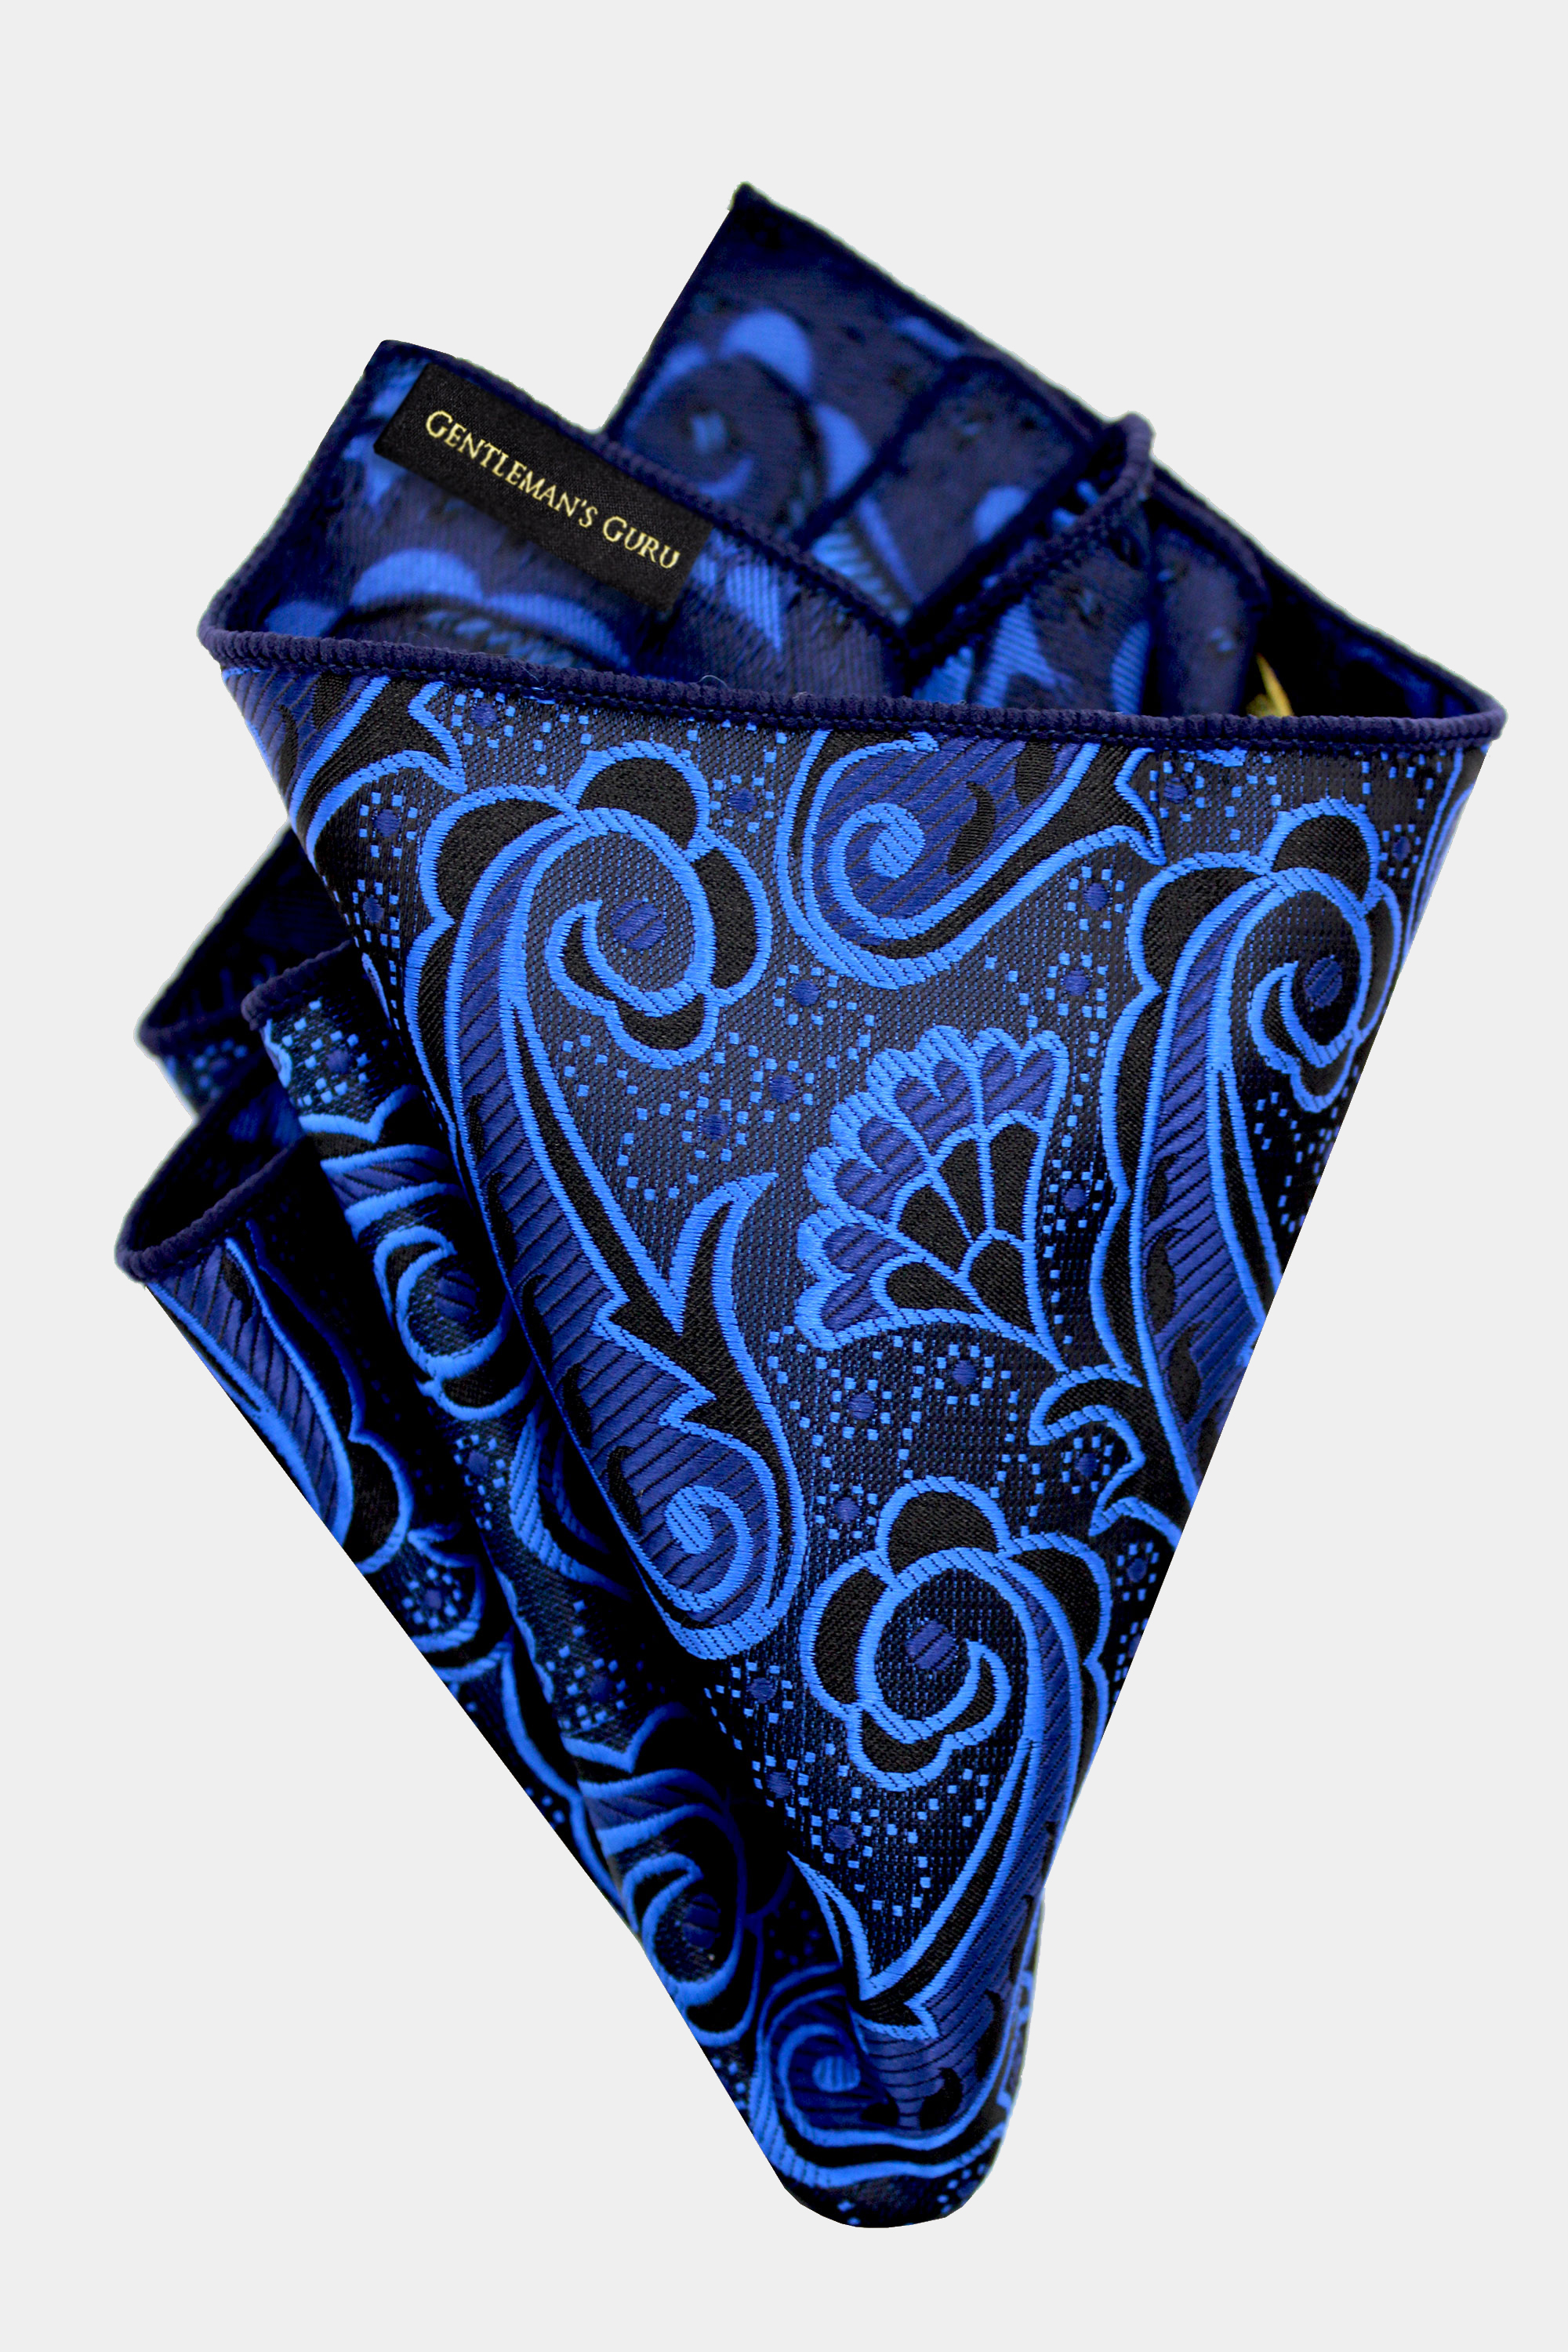 Royal BLUE Self-tie Bow tie and Hankie Set-The More Sets U Buy>The More $ U Save 